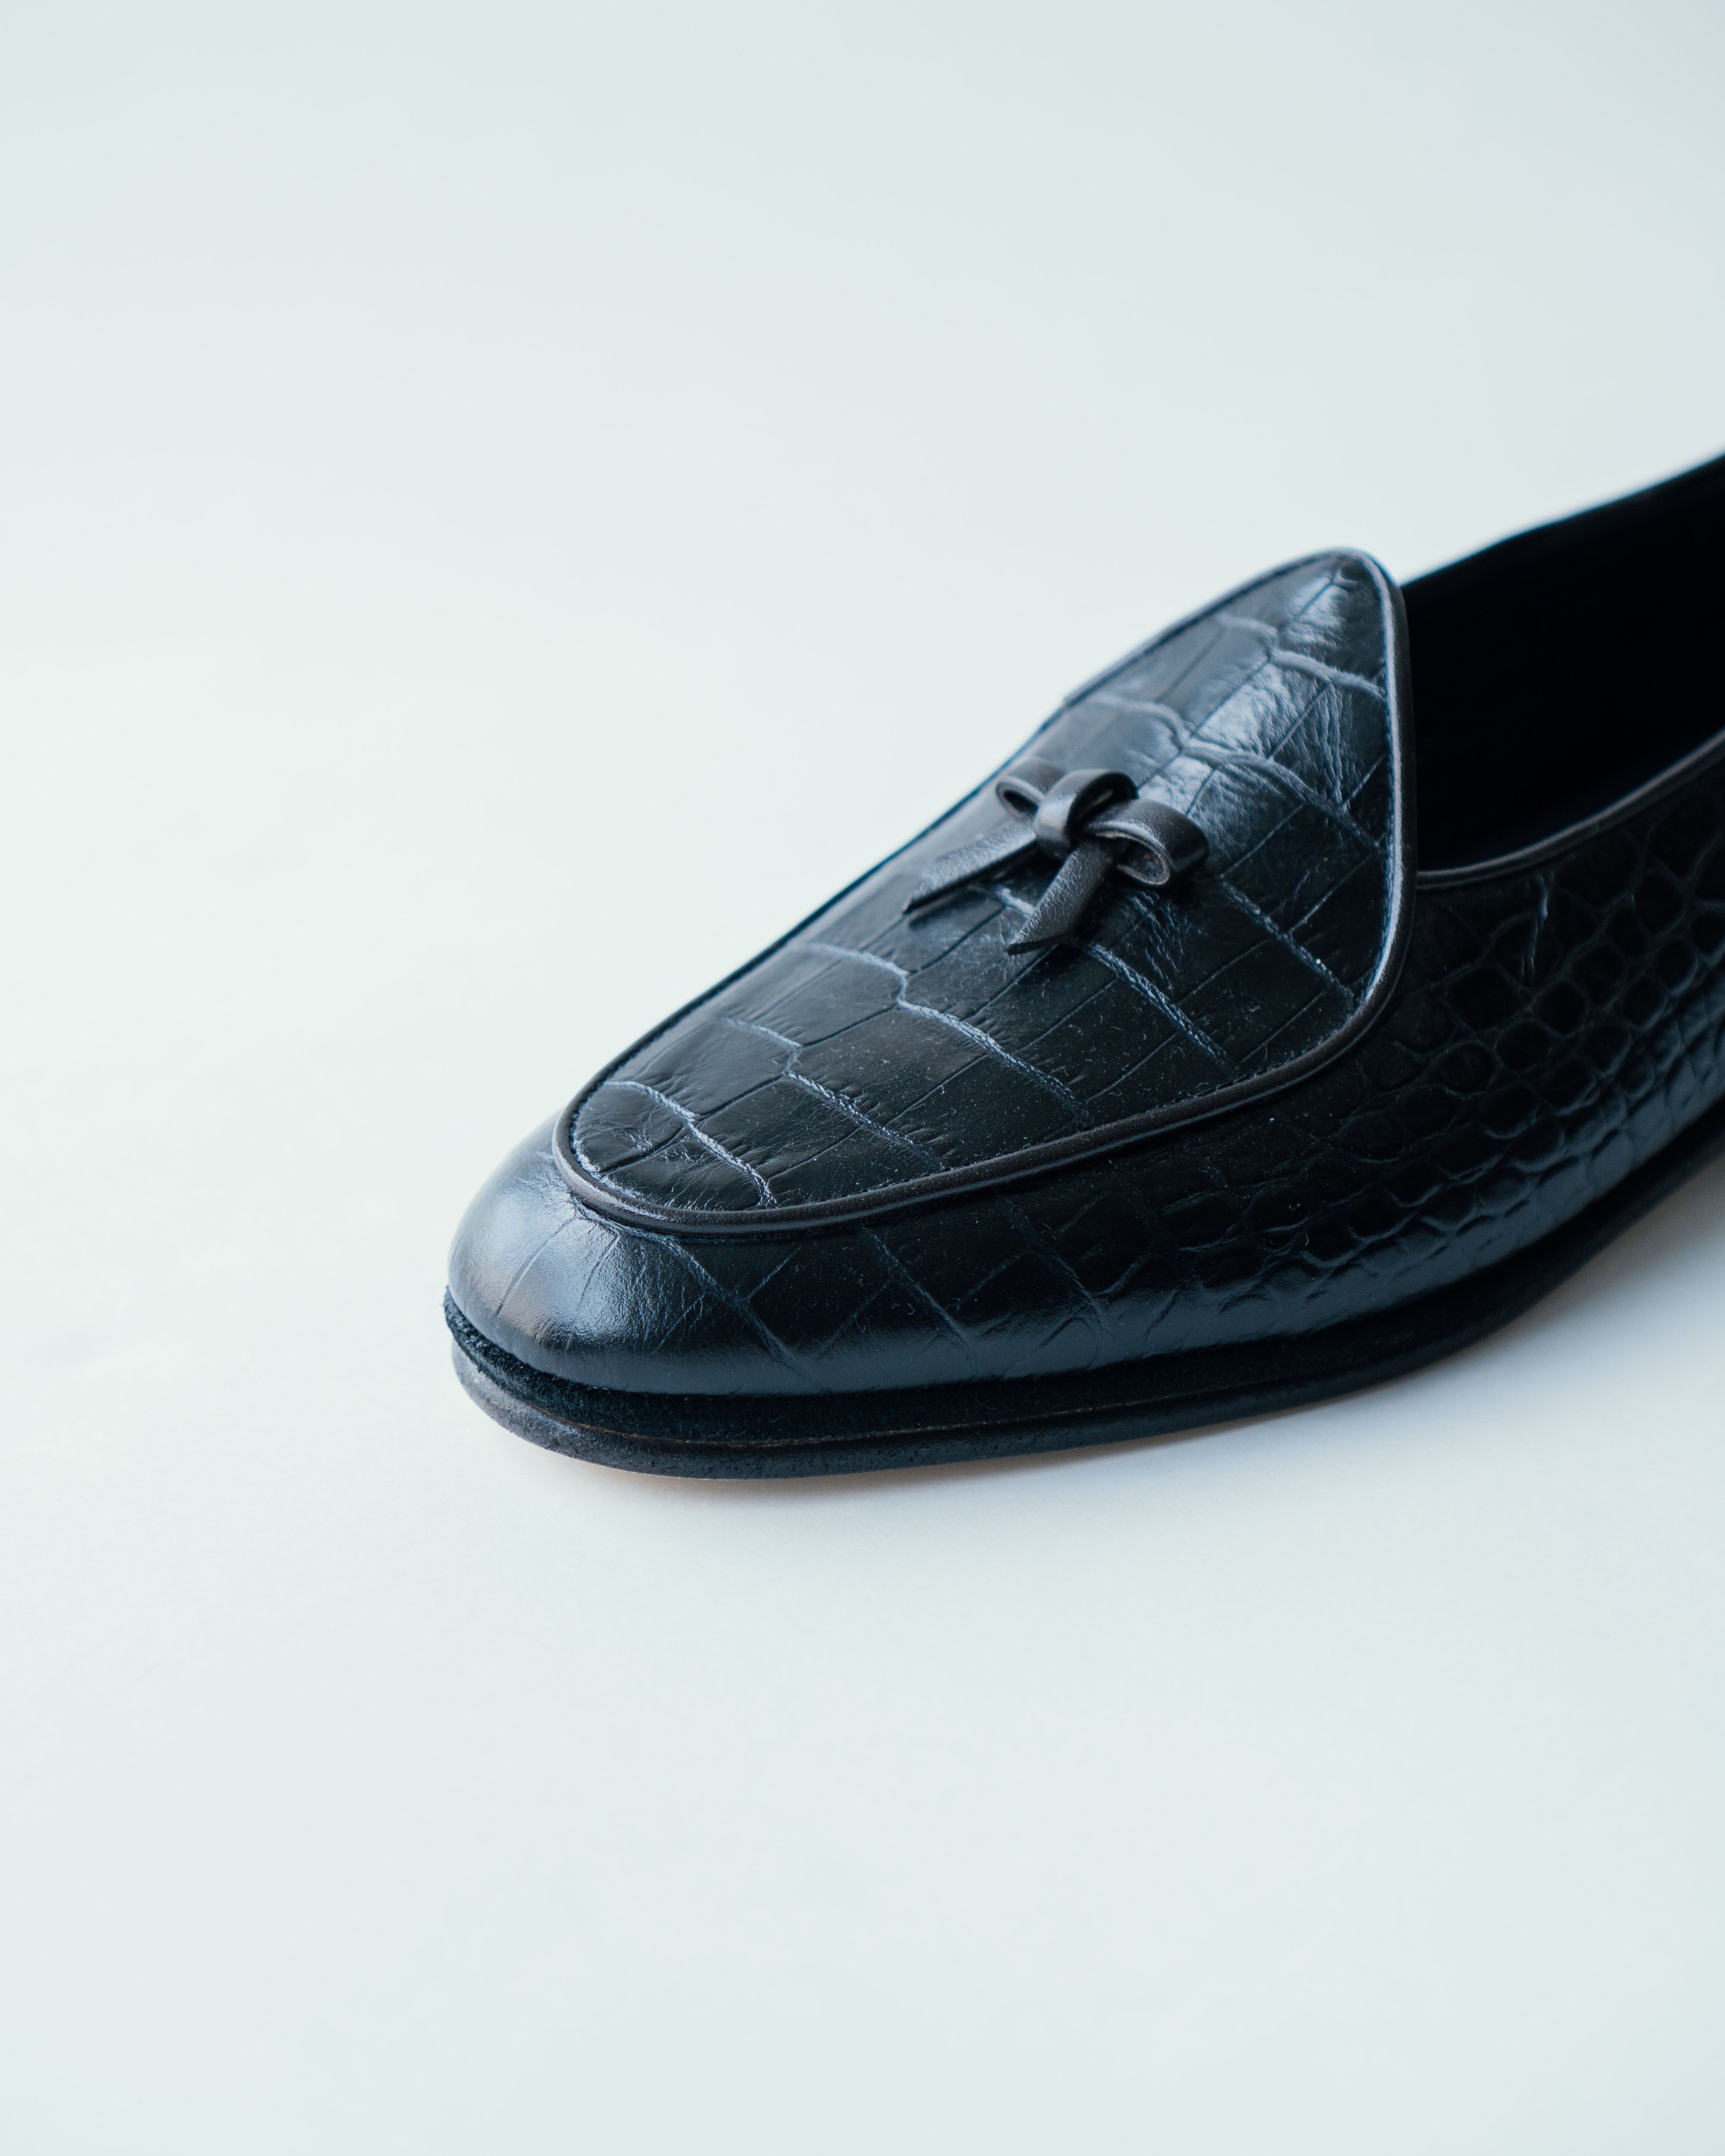 Crocodile Stampato Murphy Loafer